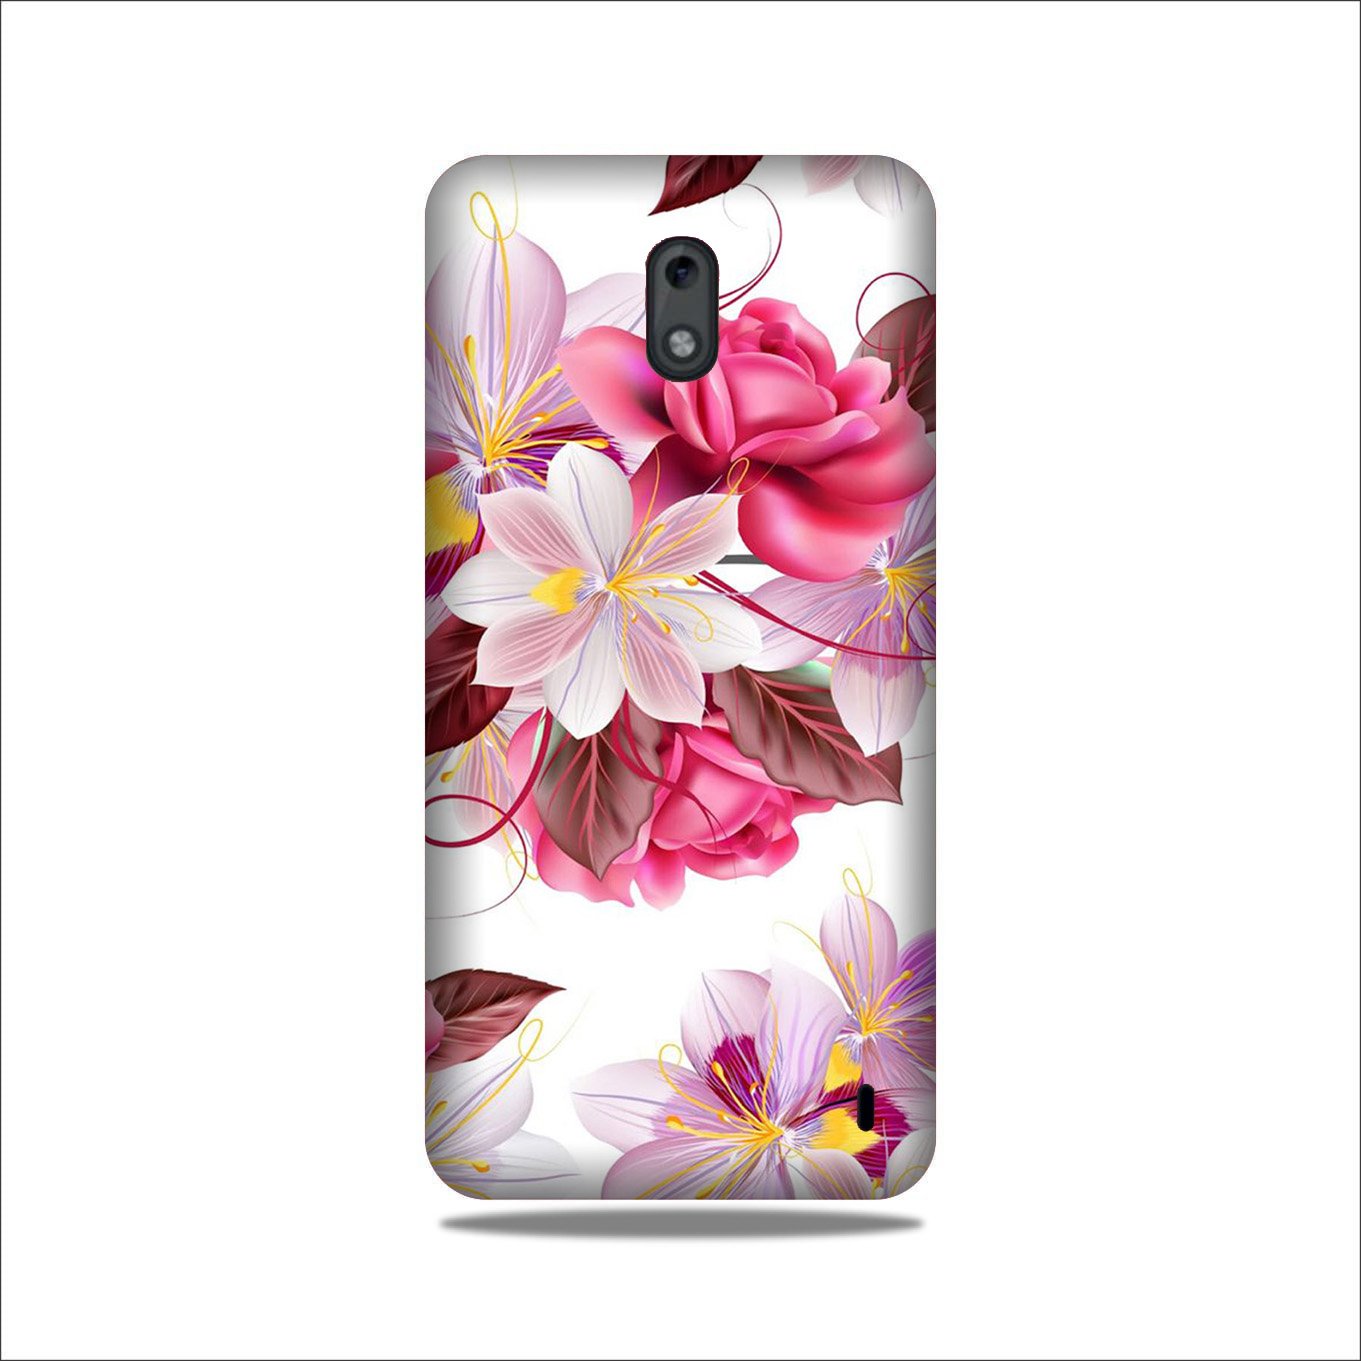 Beautiful flowers Case for Nokia 3